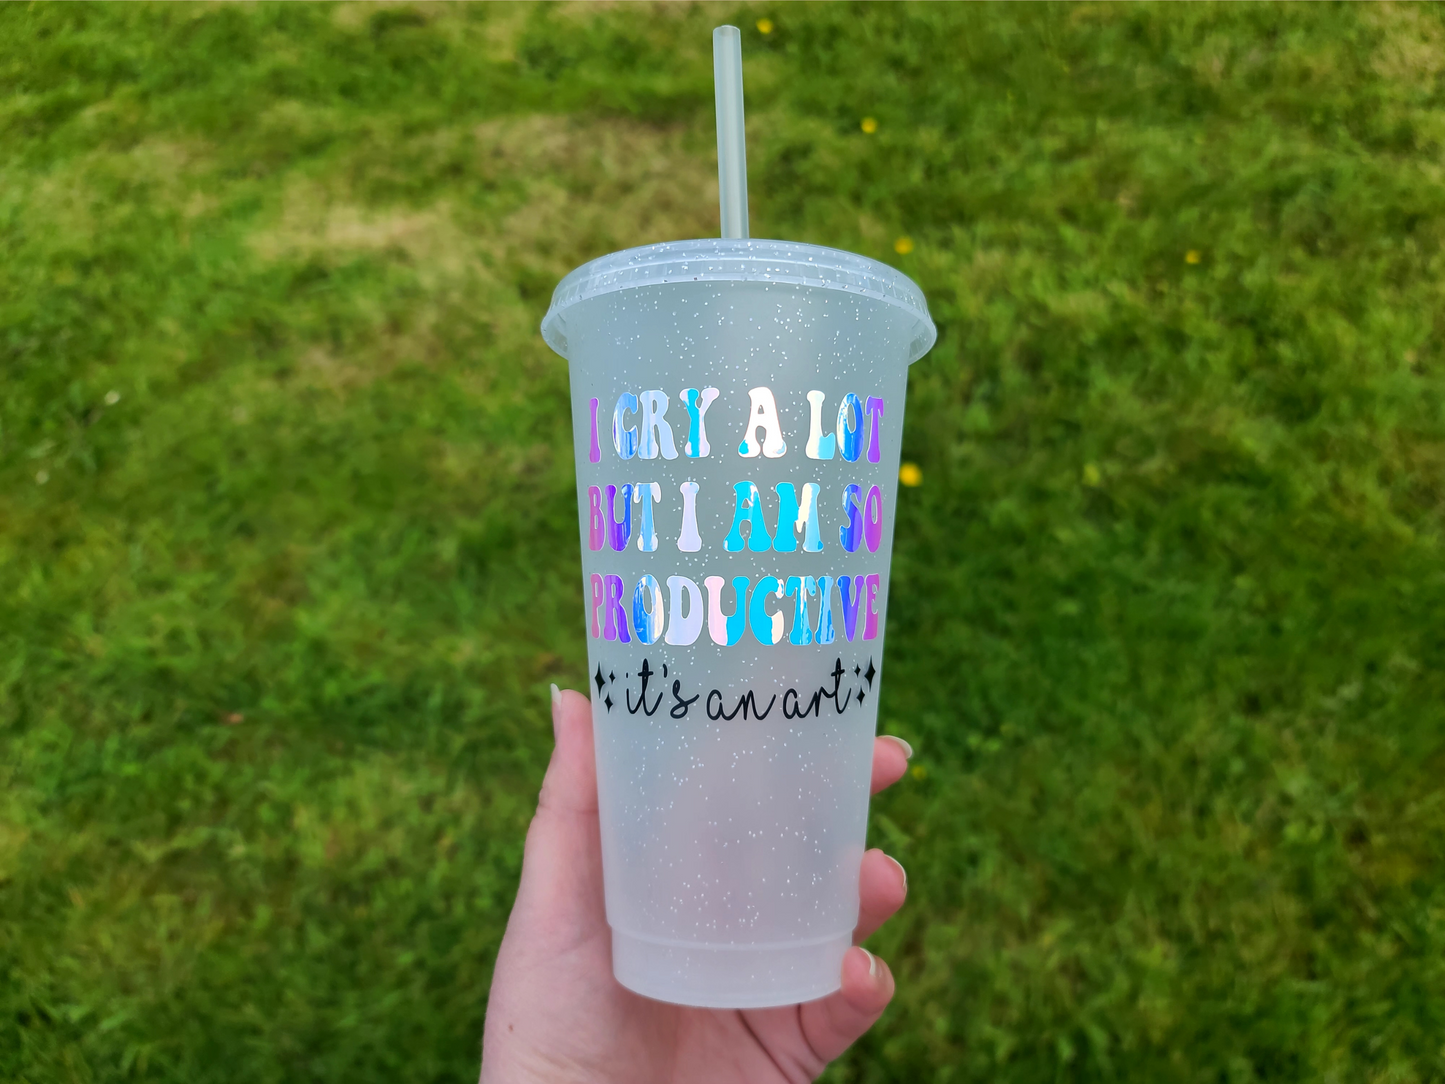 A Glitter tumbler with The Text I Cry A Lot But I am So Productive Lyrics From The Tortured Poets Department TTPD. This is a 24oz cup which is perfect for fans of Taylor Swift. Made and sold by Krissi's Creations.